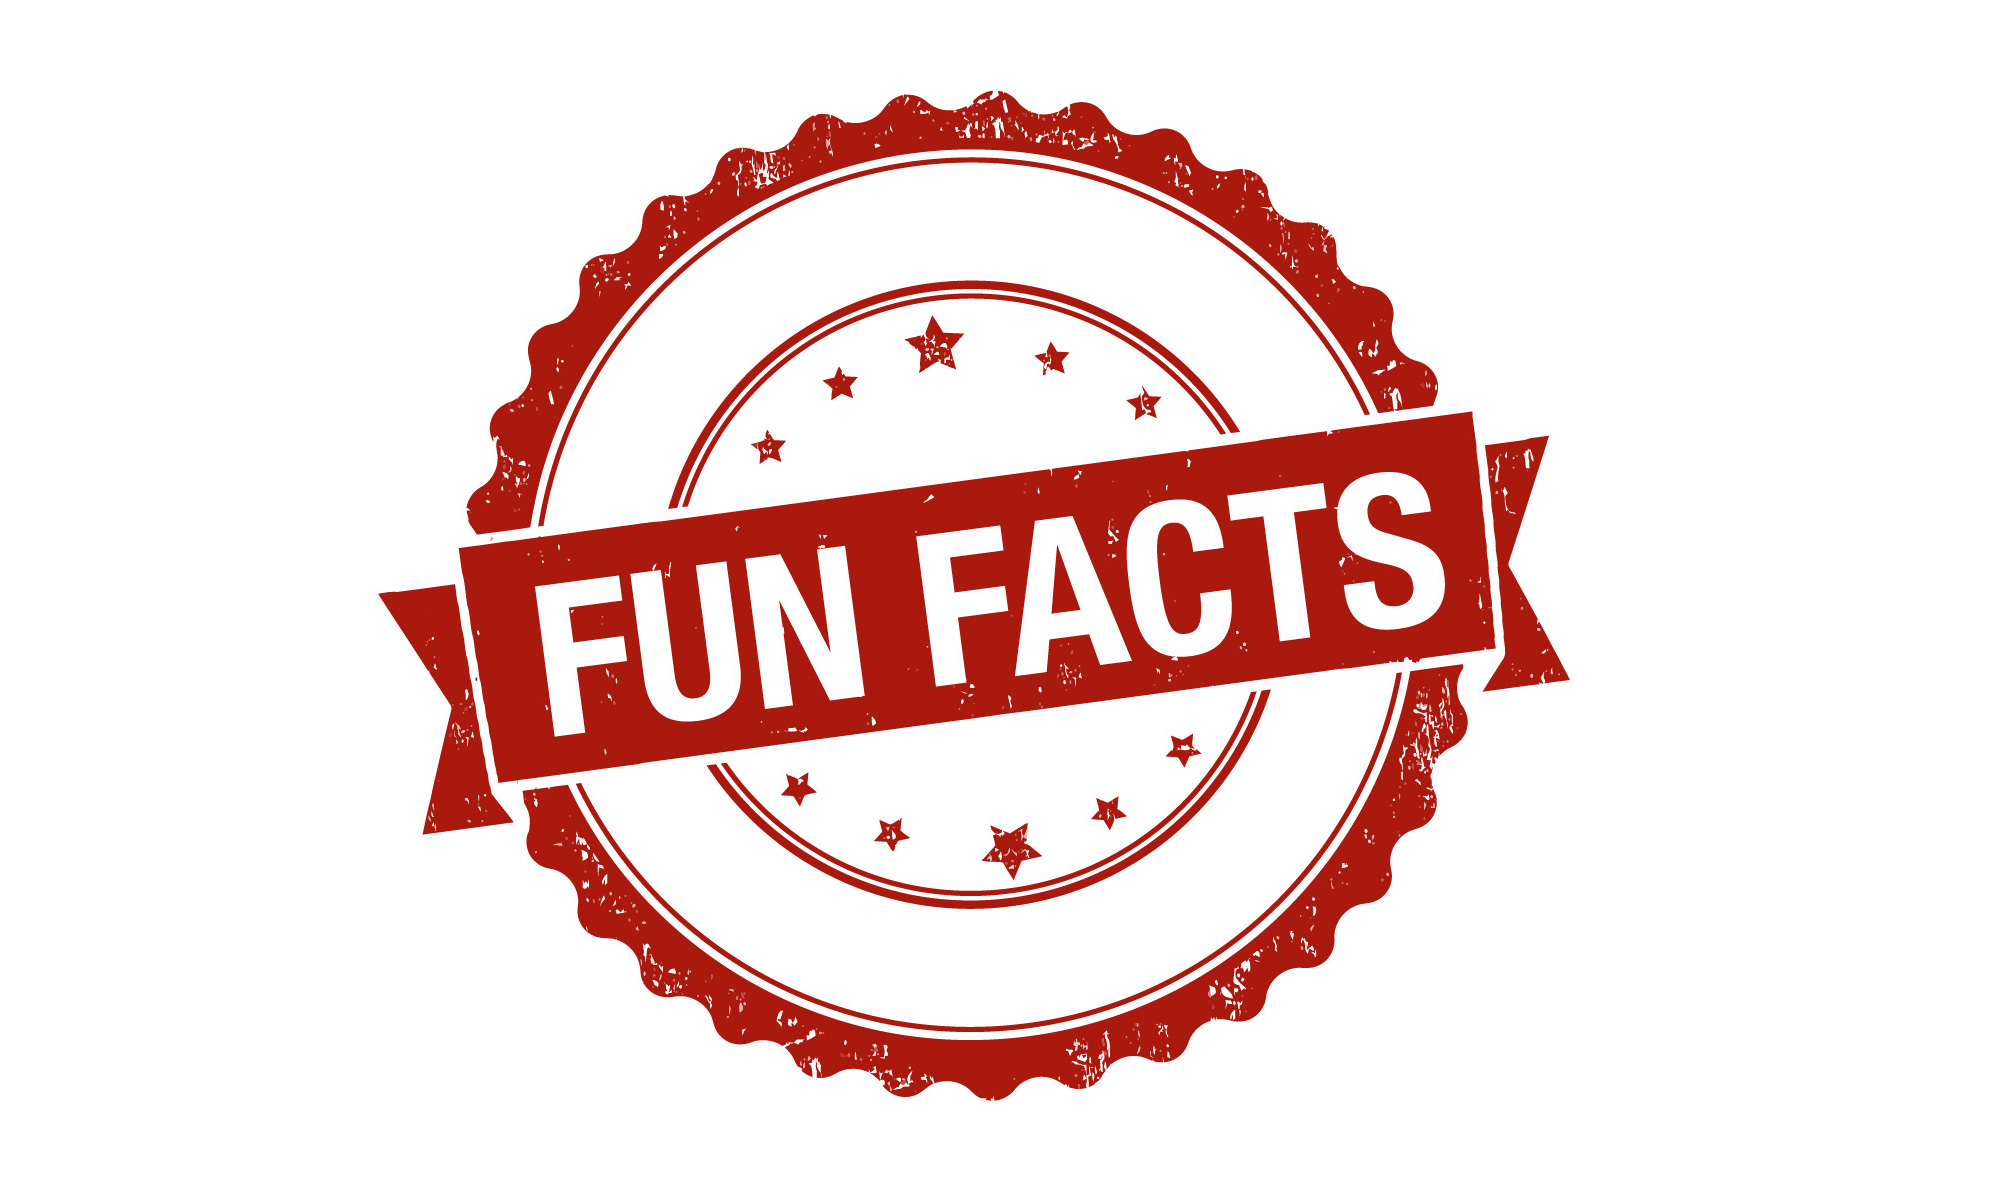 Fun Facts 2 Published By Kayural On Day 3 629 Page 1 Of 1